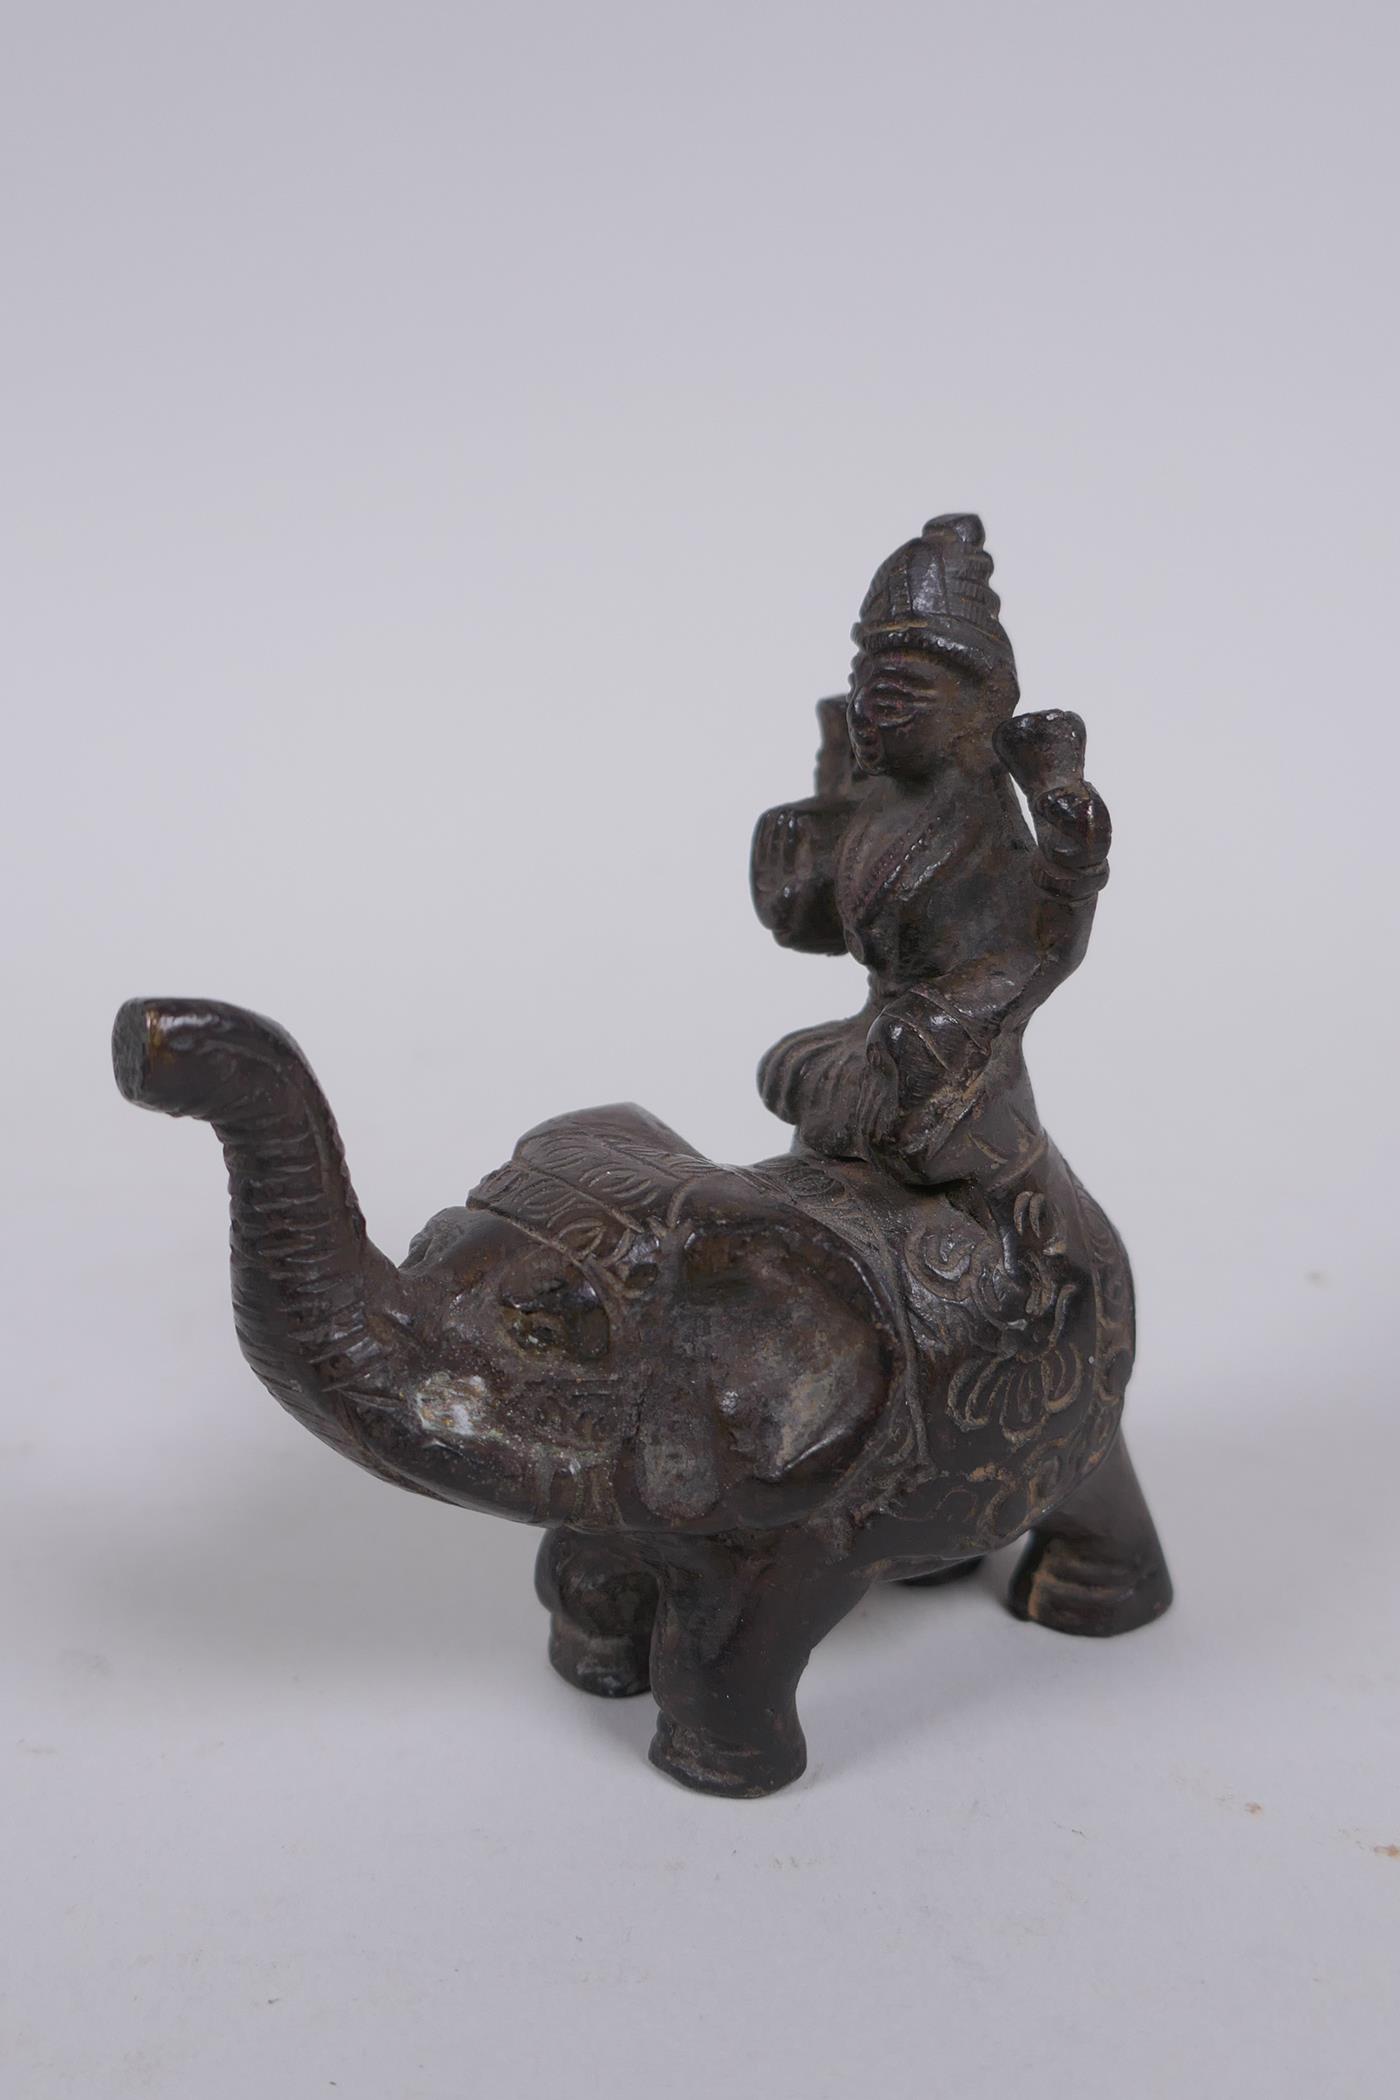 An Indian bronze figure of ganesh, and another Indian bronze figure of a deity riding an elephant, - Image 5 of 6